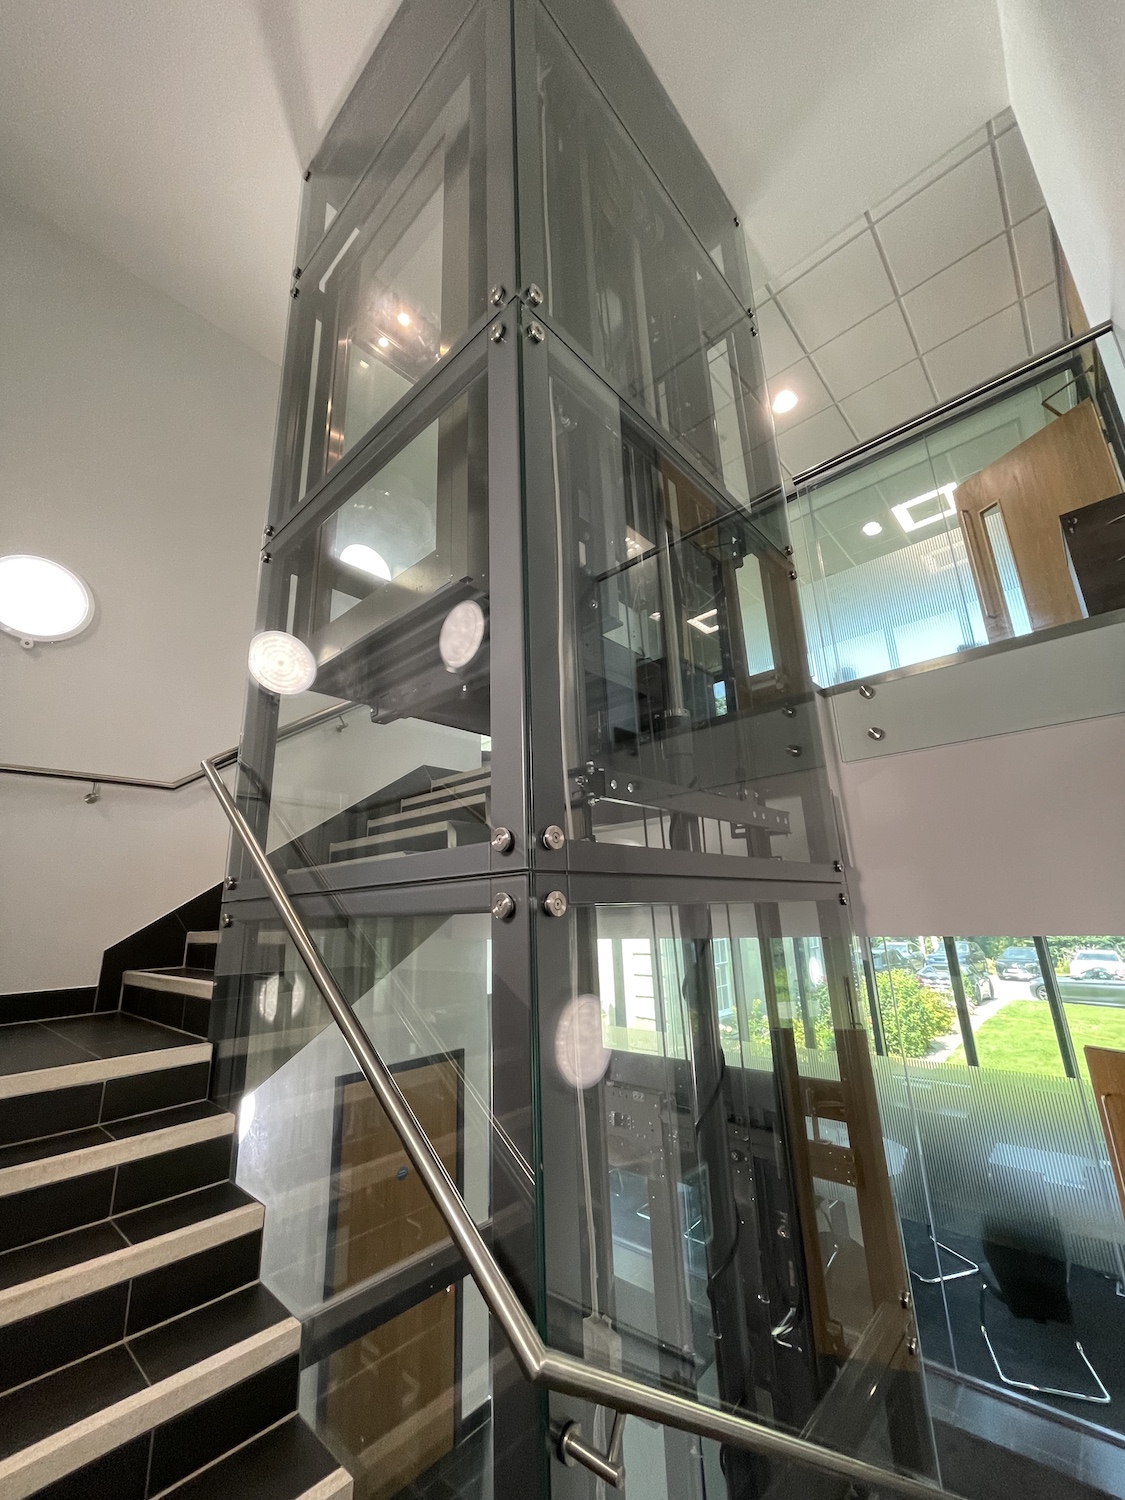 The lift features a custom made handrail which is fixed through the glass onto the lift's steel frame